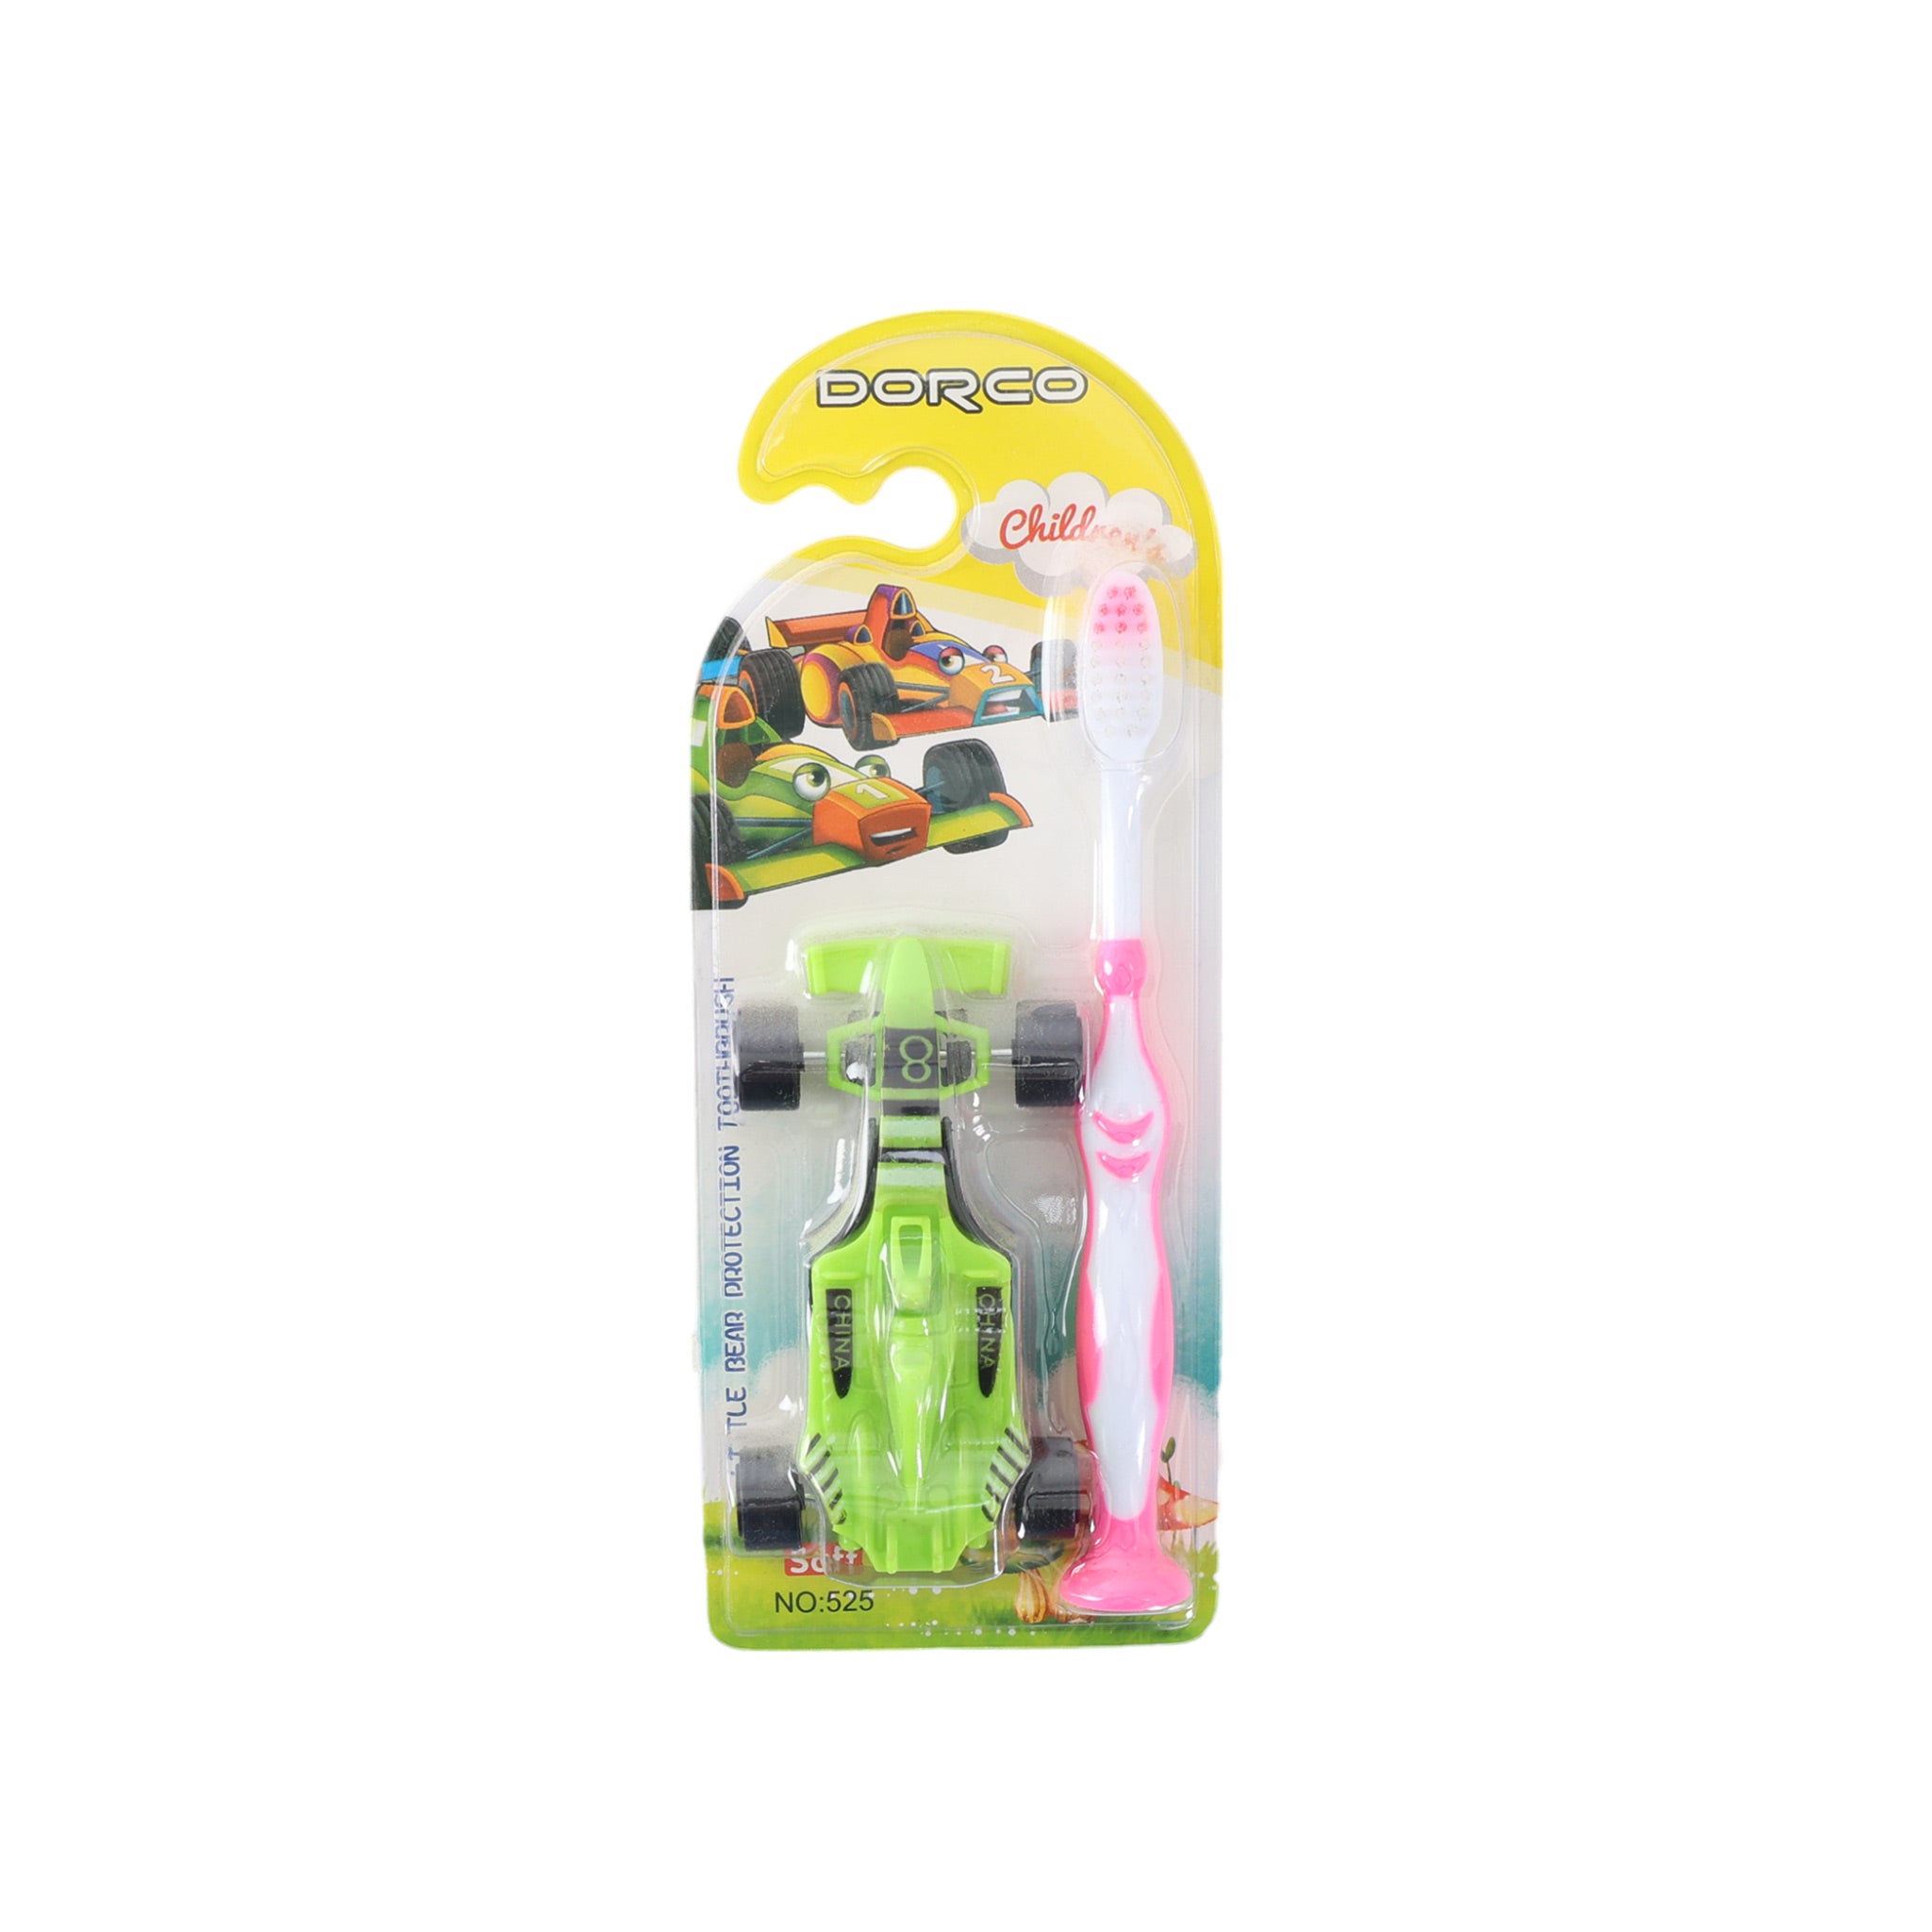 DORCO Kids Teeth Brush with Toy